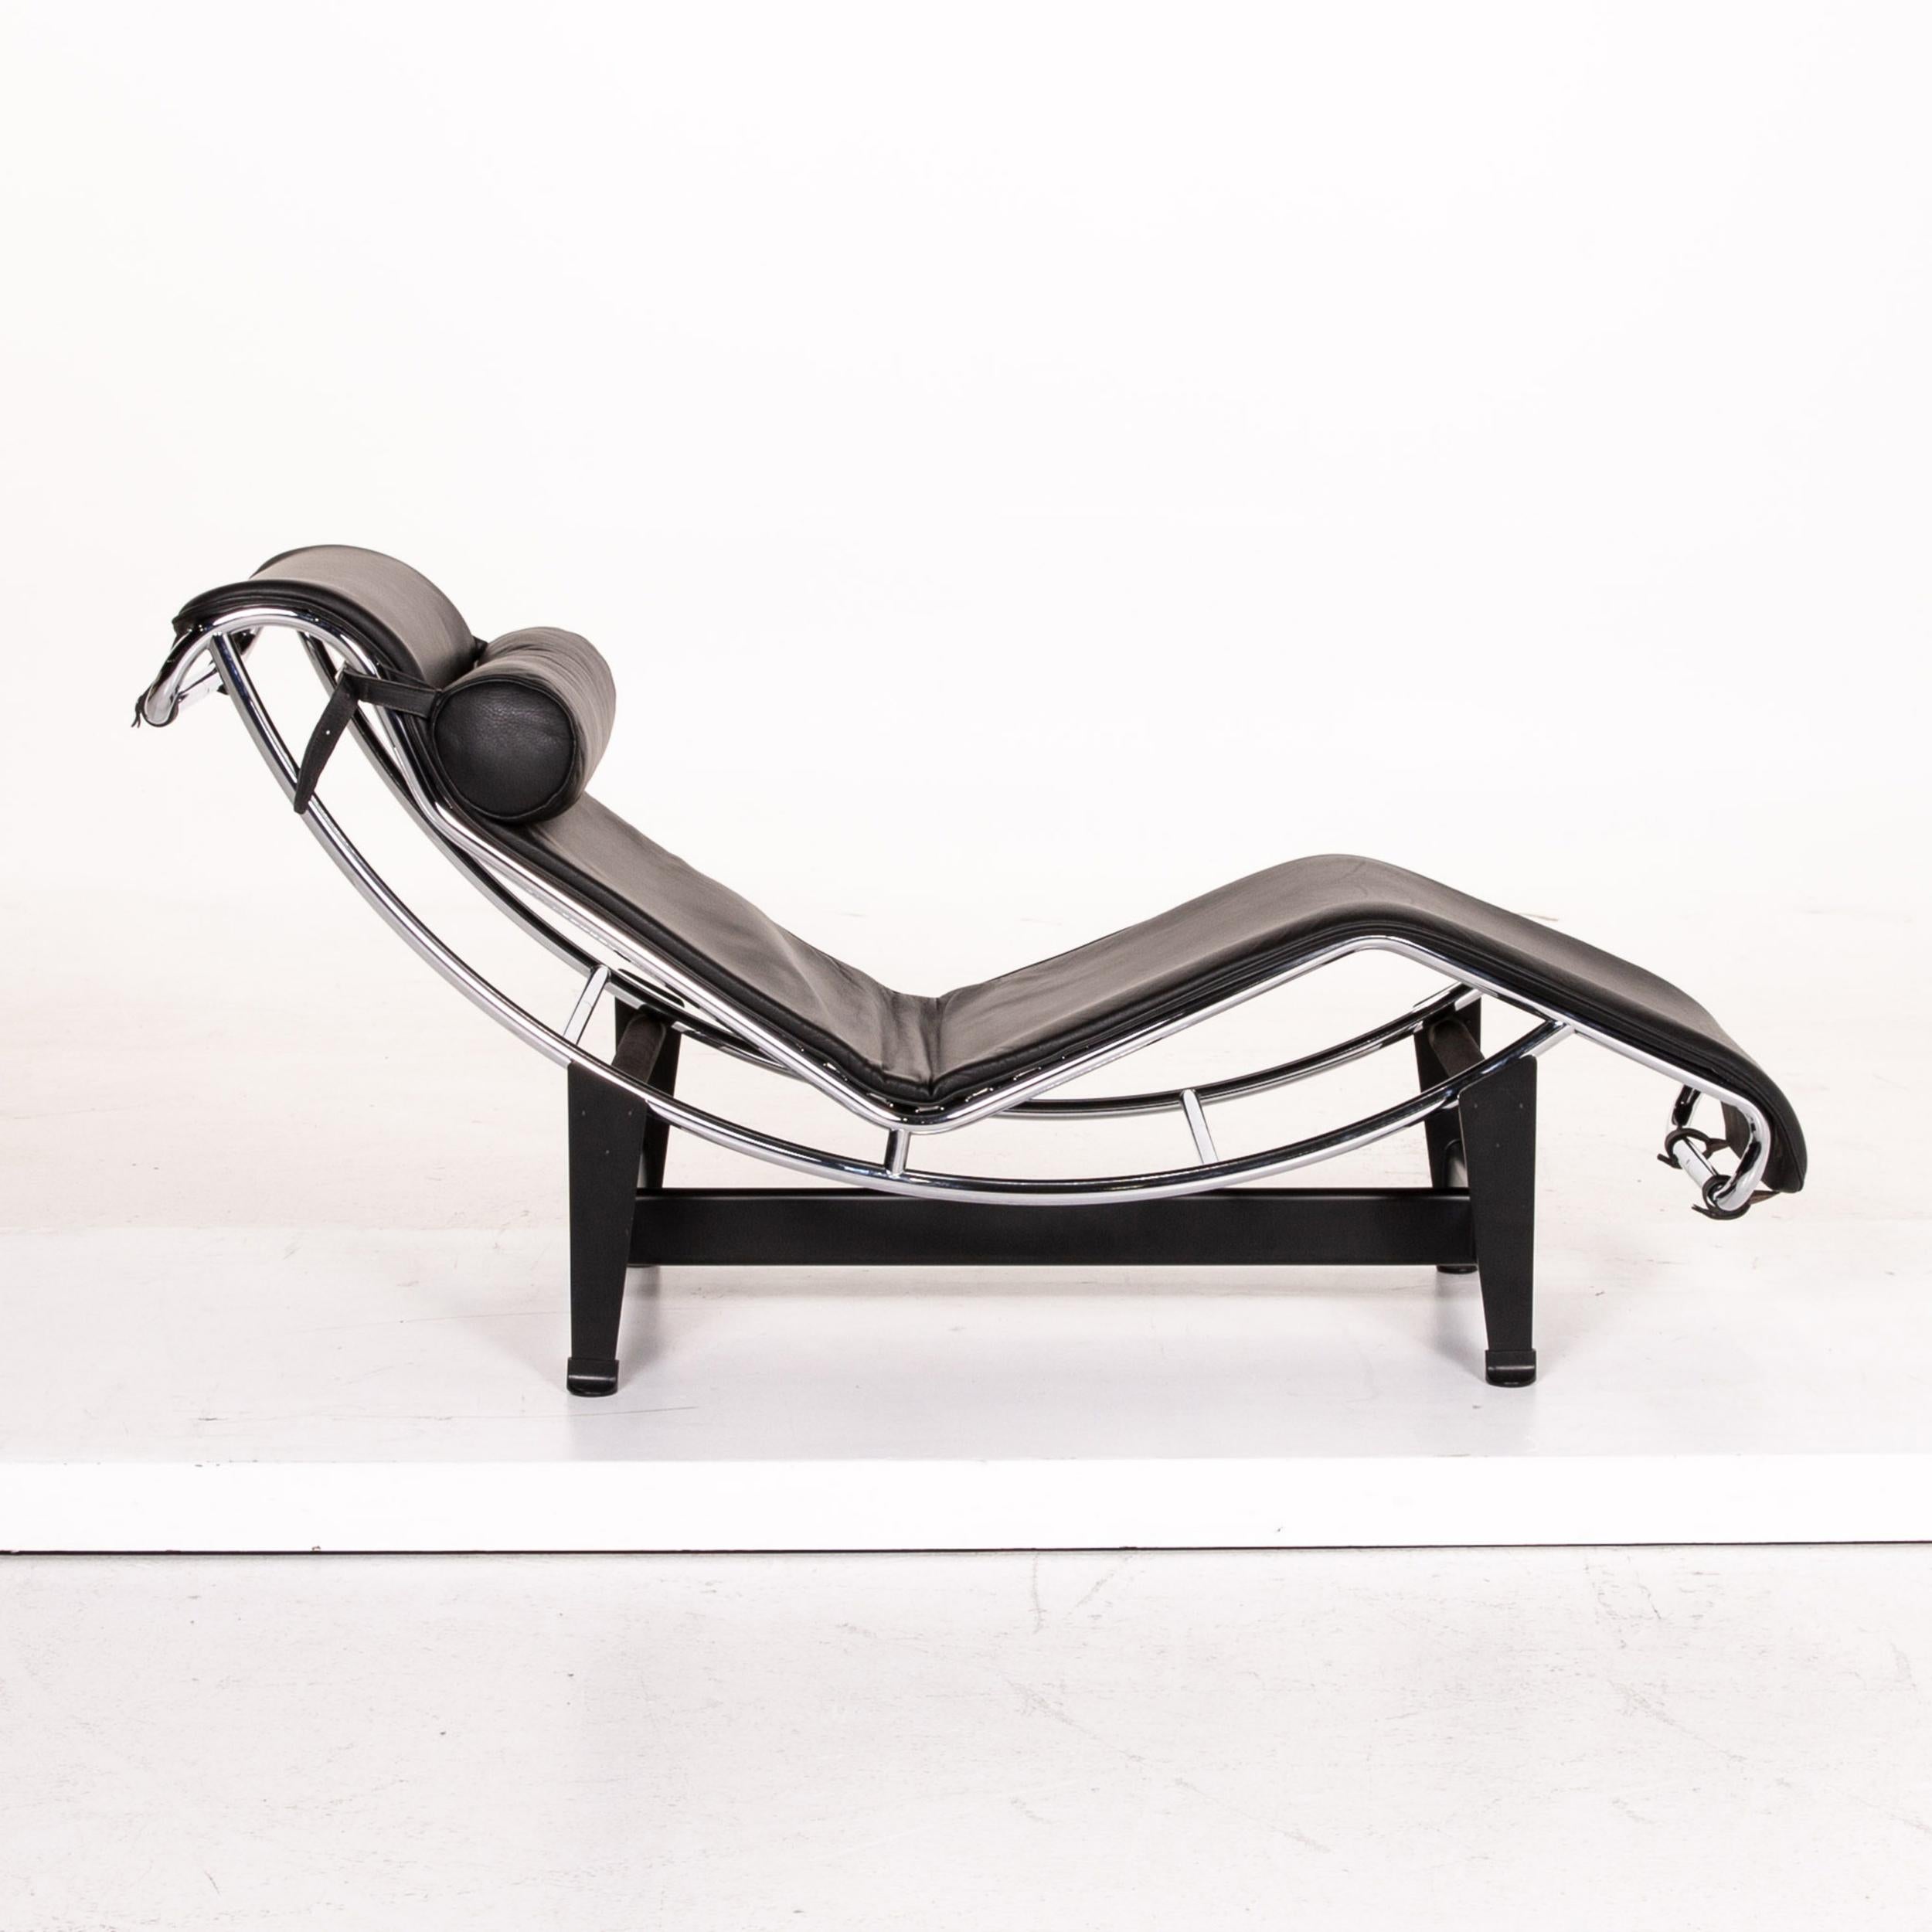 Cassina Le Corbusier LC 4 Leather Lounger Black Function Relaxation Function For Sale 4